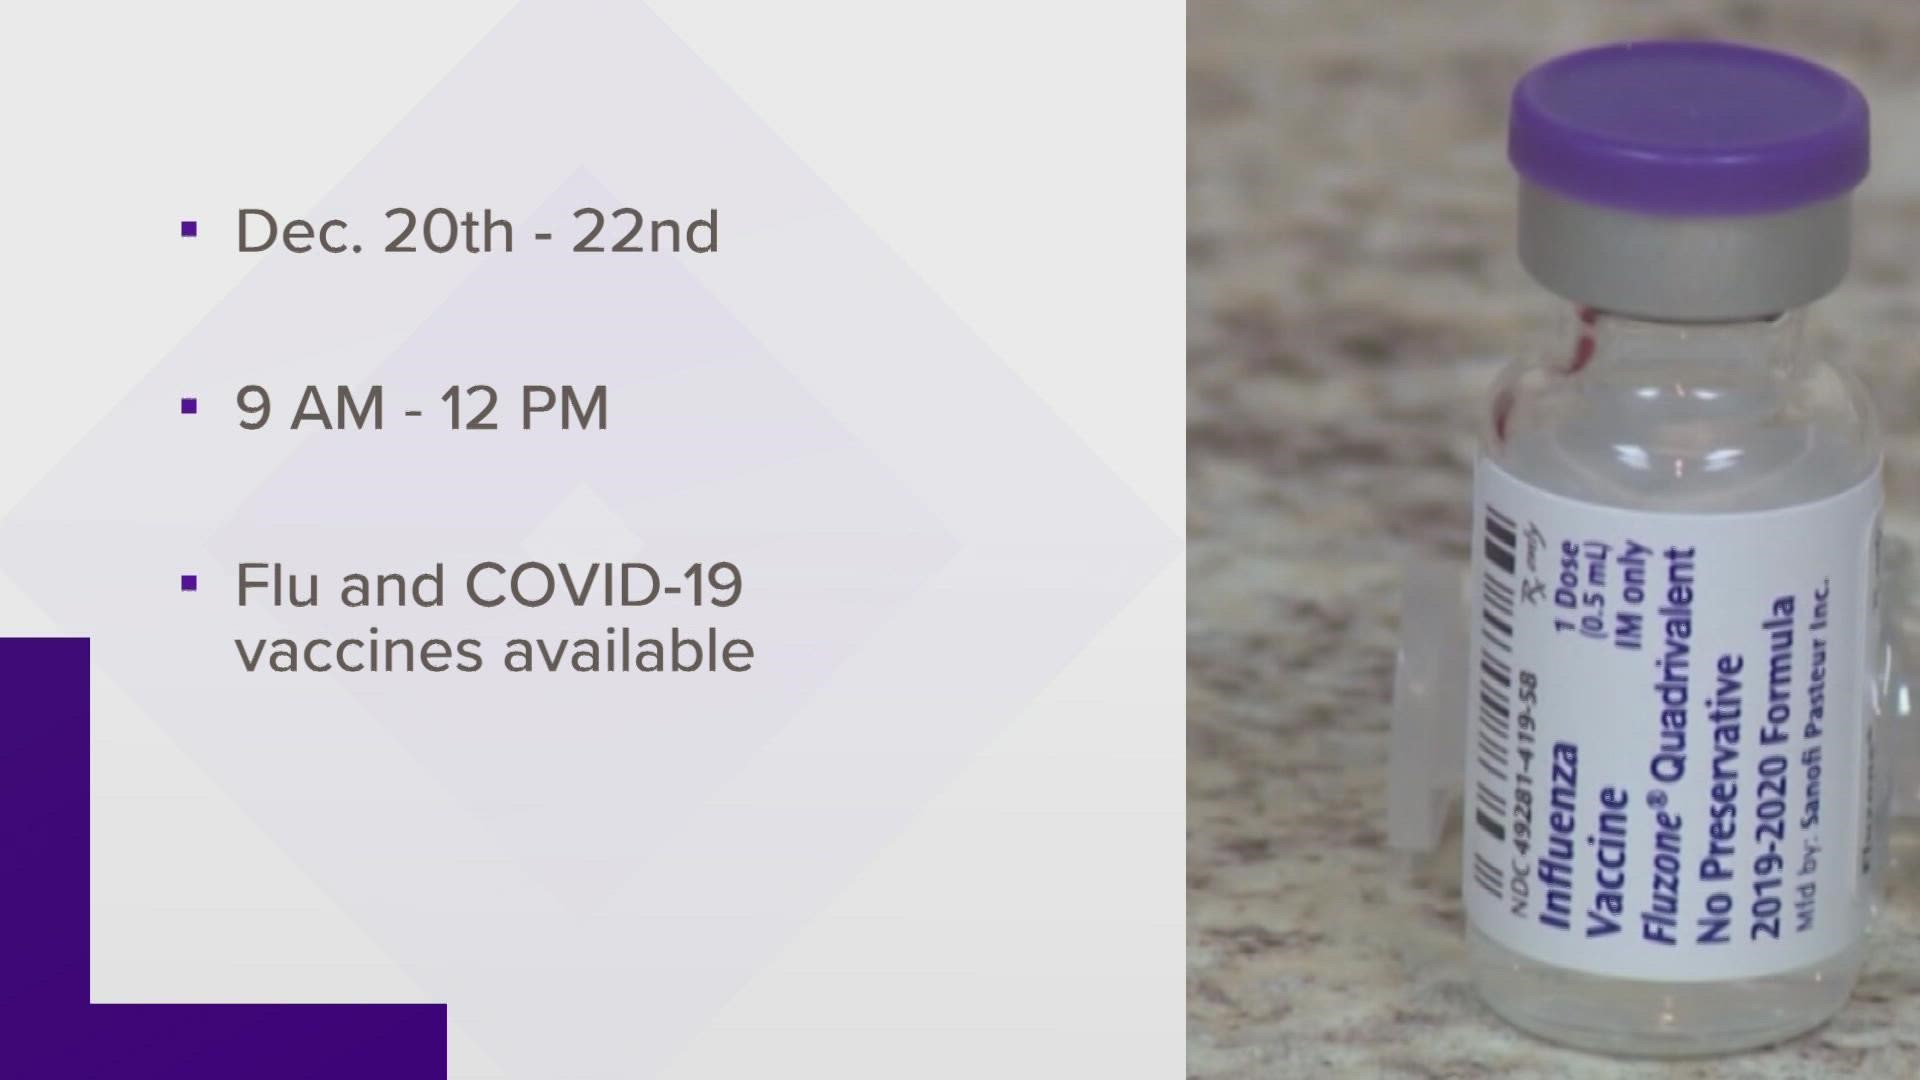 Officials said they've seen a jump in flu cases they haven't seen in previous years. They will offer the flu vaccine and the COVID-19 vaccine plus boosters.